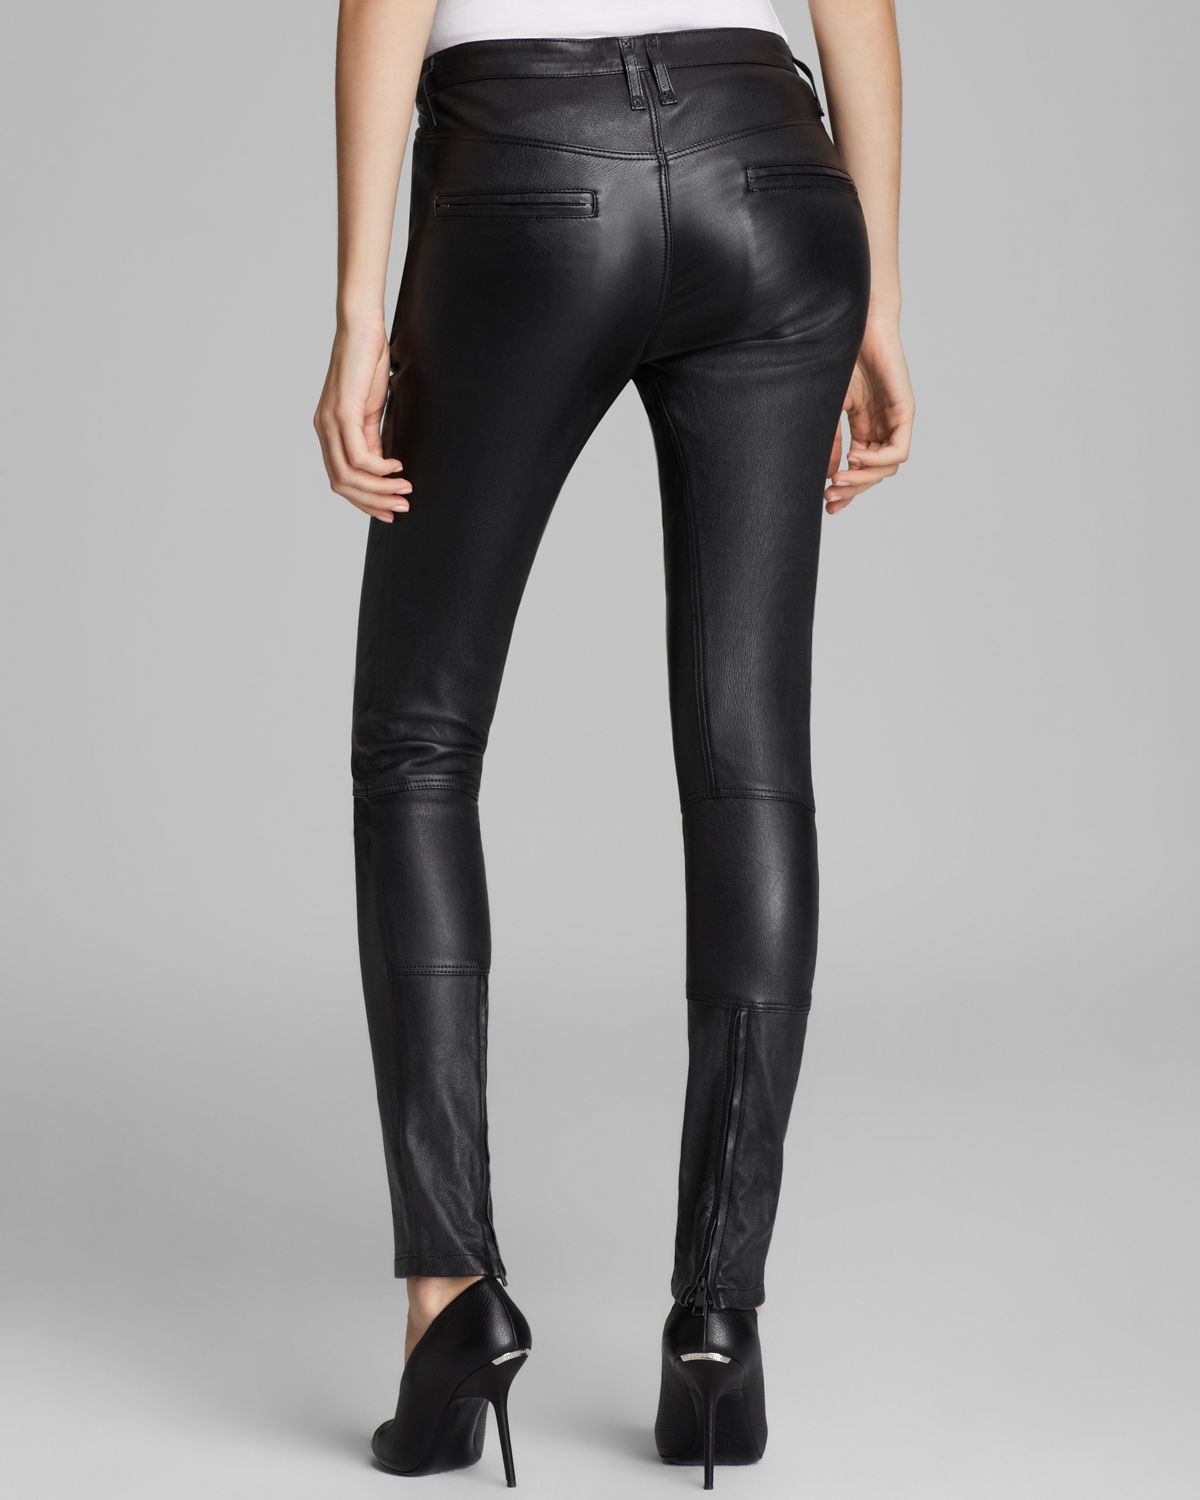 burberry leather pants